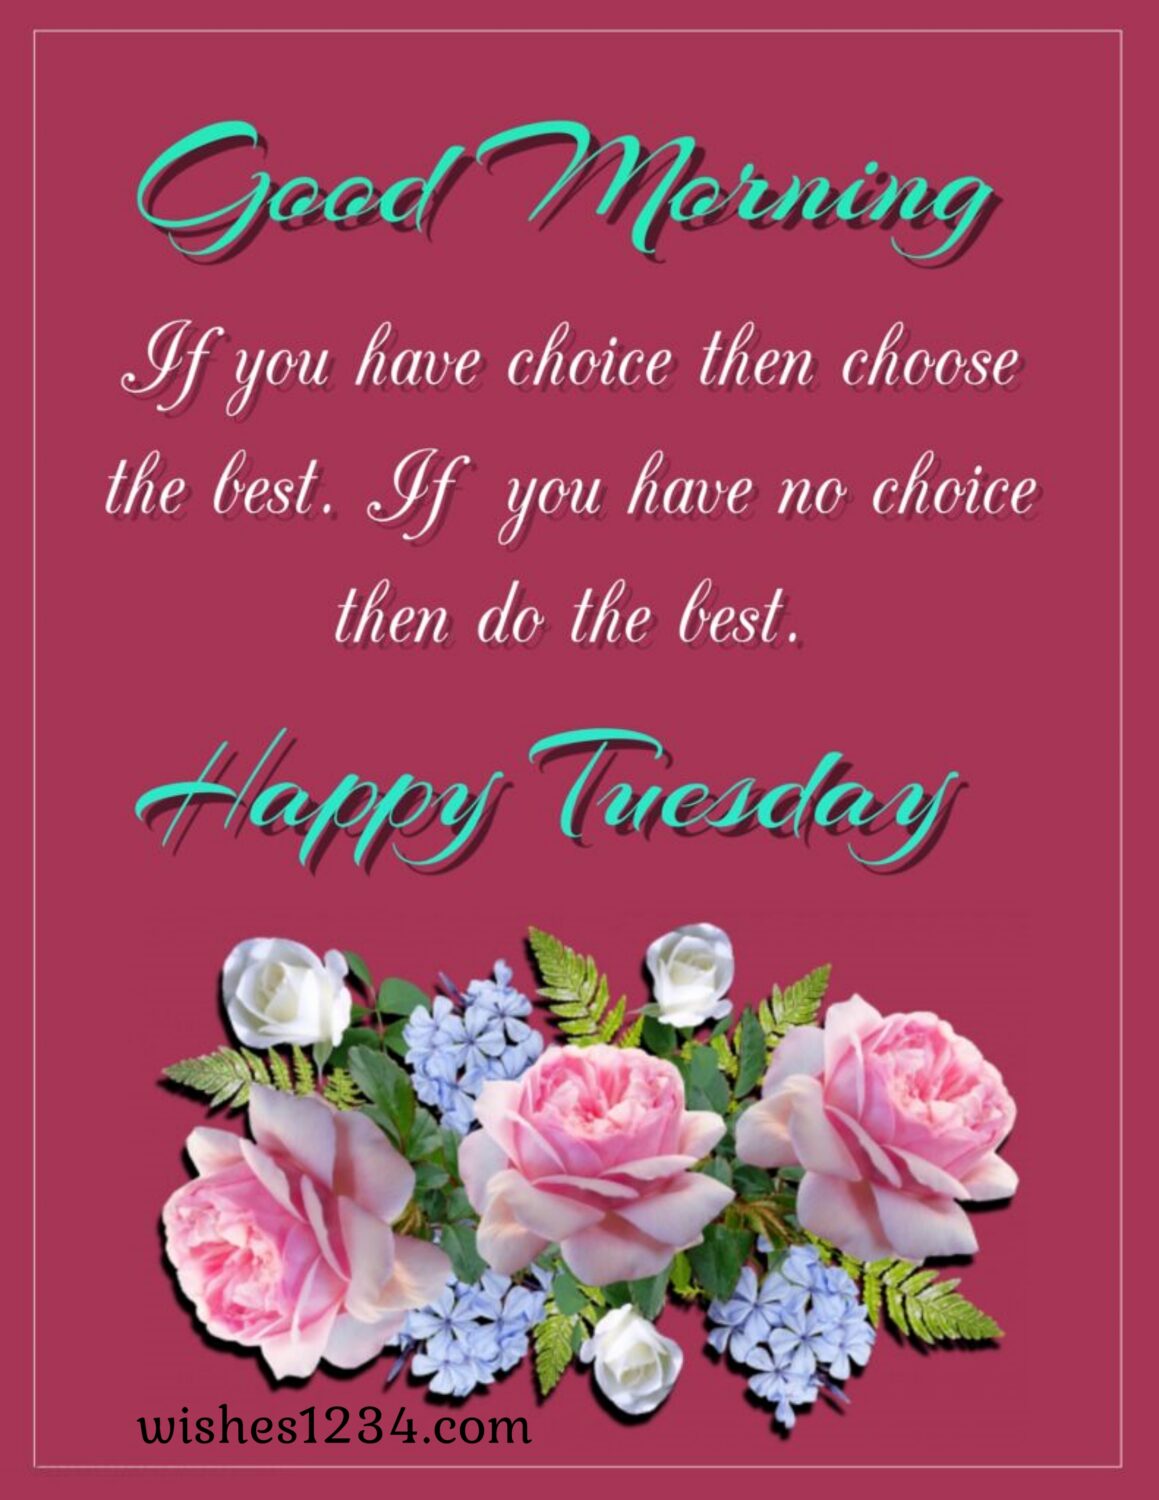 Tuesday quote with Bunch of three pink and white roses.